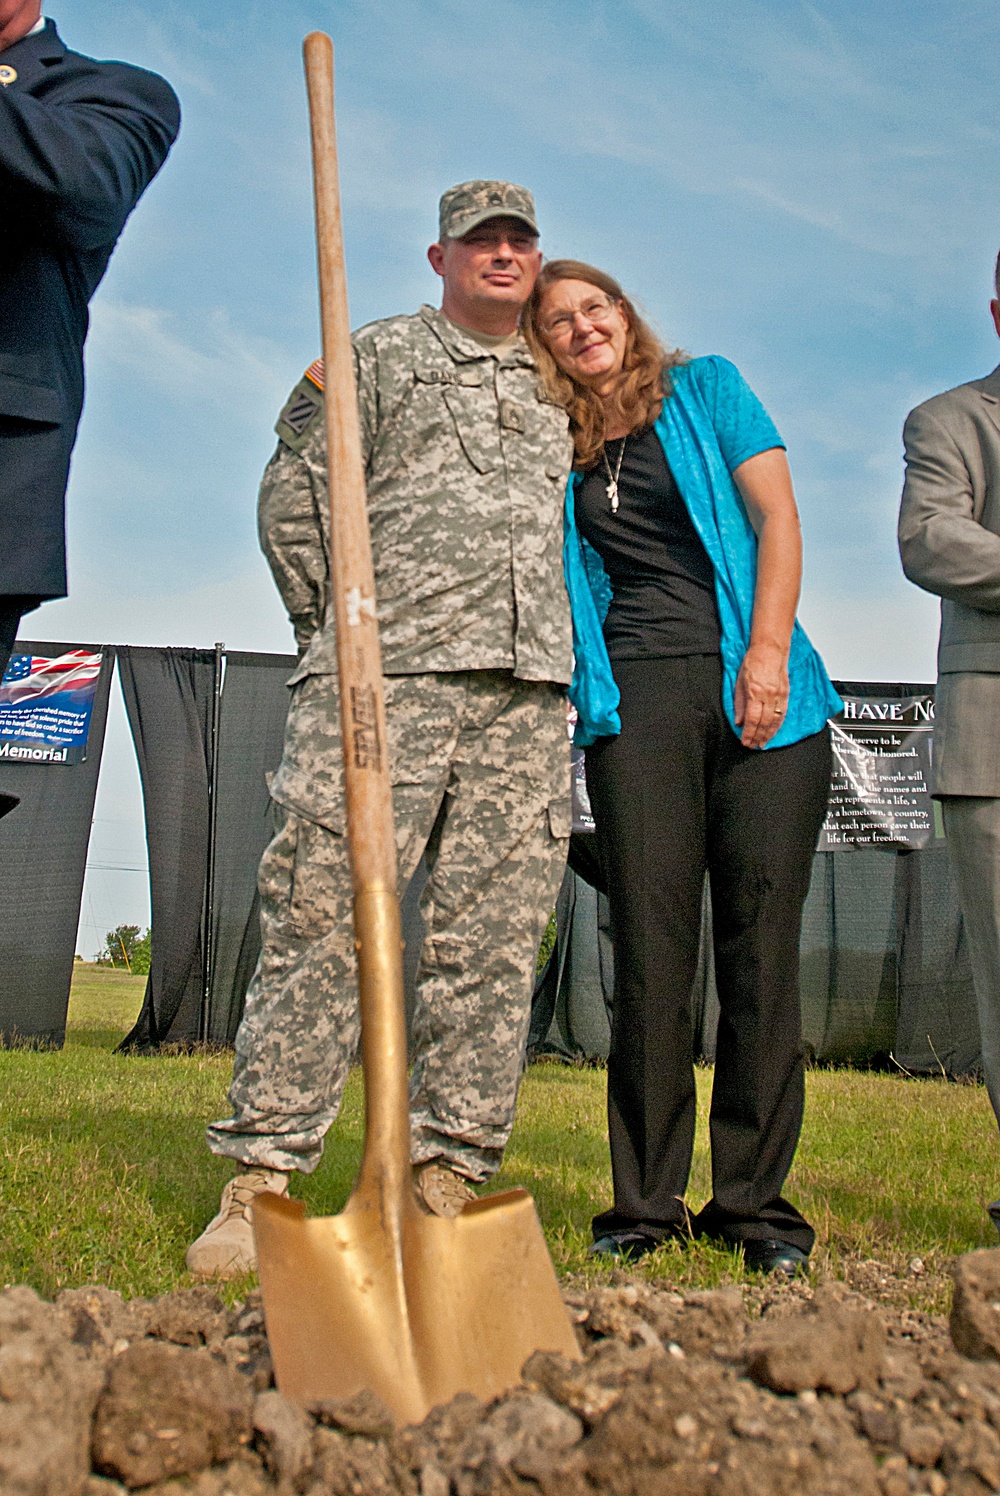 Wounded Soldier and survivor embrace at the November 5, 2009 Fort Hood Shooting Memorial groundbreaking ceremony